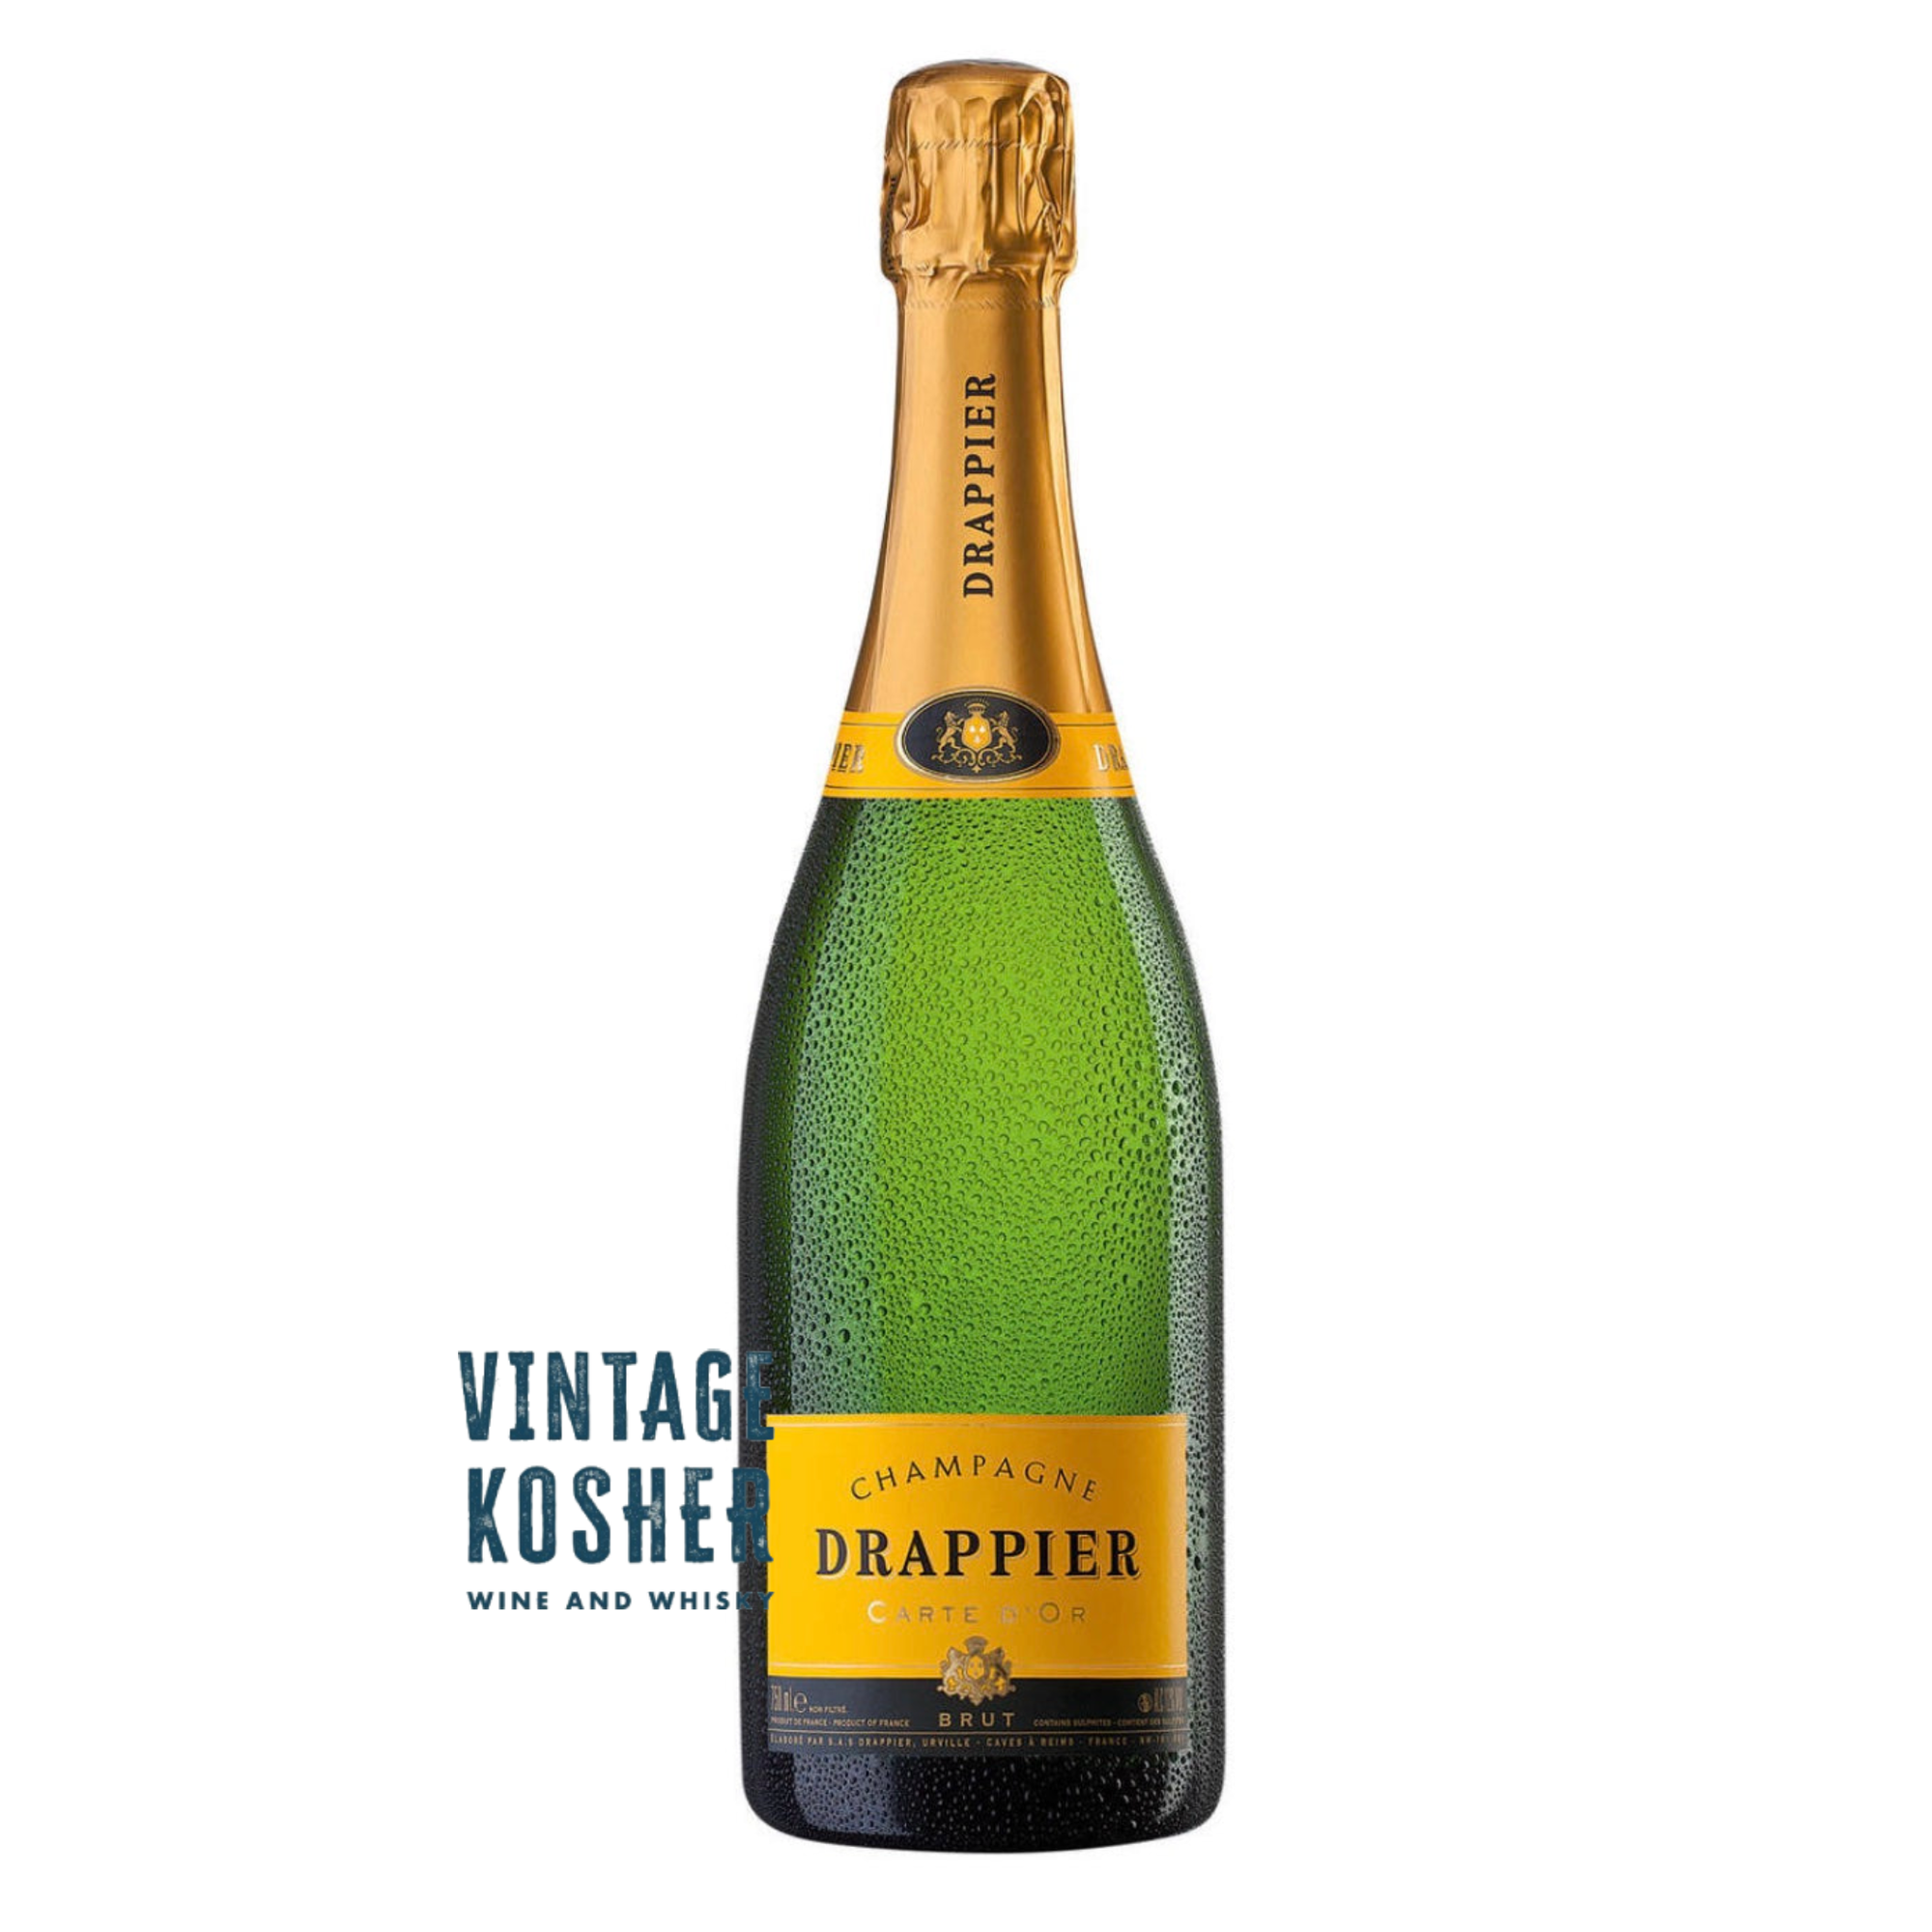 Drappier Carte d'Or Brut Champagne